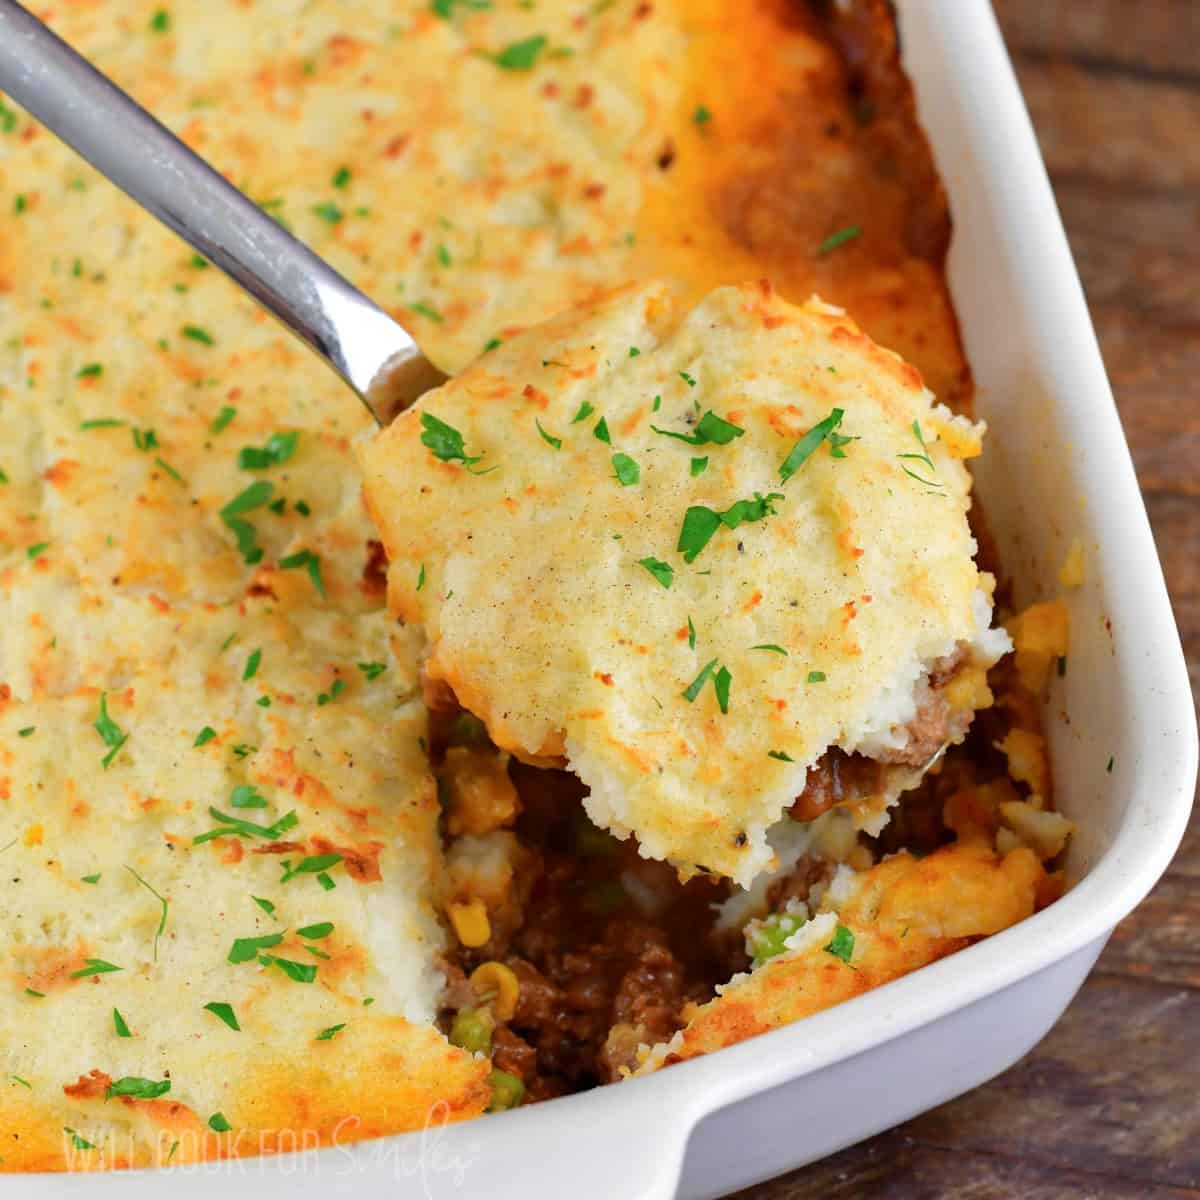 https://www.willcookforsmiles.com/wp-content/uploads/2023/02/Shepherds-Pie-scooping-out-cr.jpg